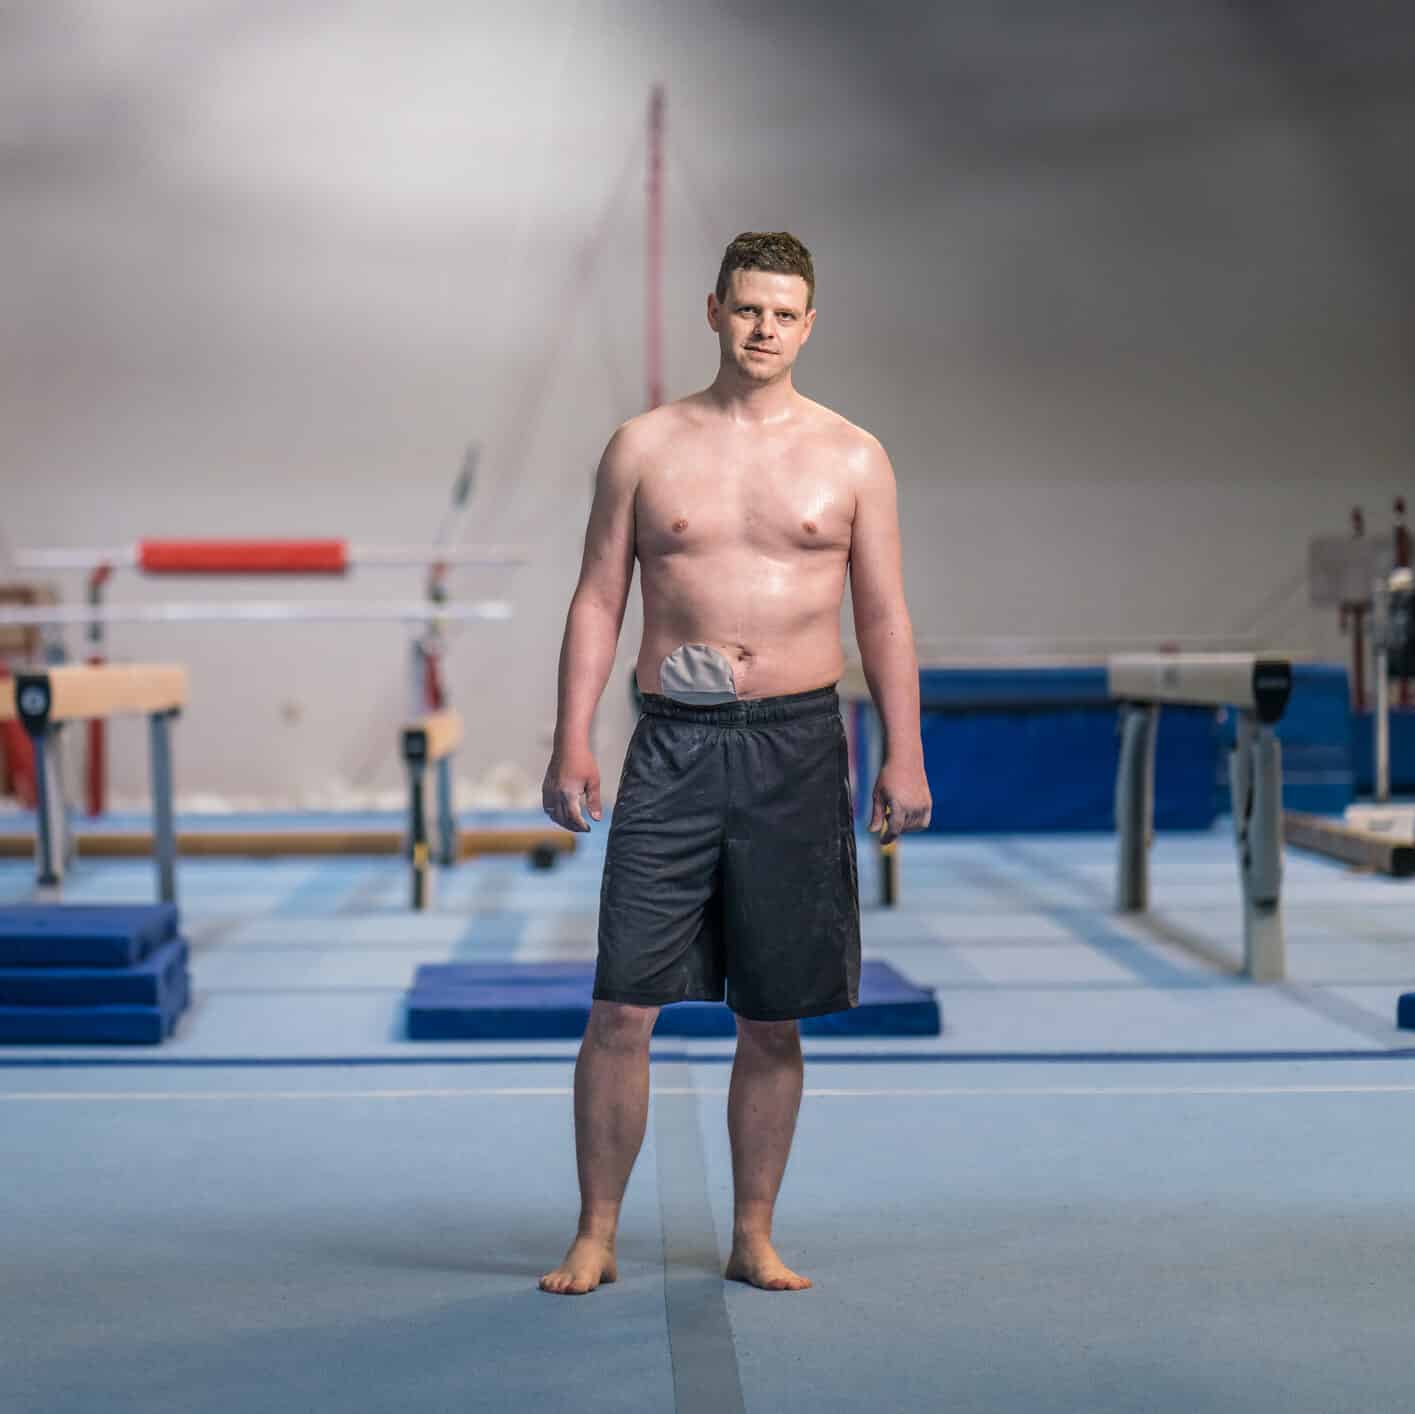 Full length of shirtless male athlete with stoma bag standing at gym. Portrait of confident sportsman is against gymnastics equipment. He is at health club.